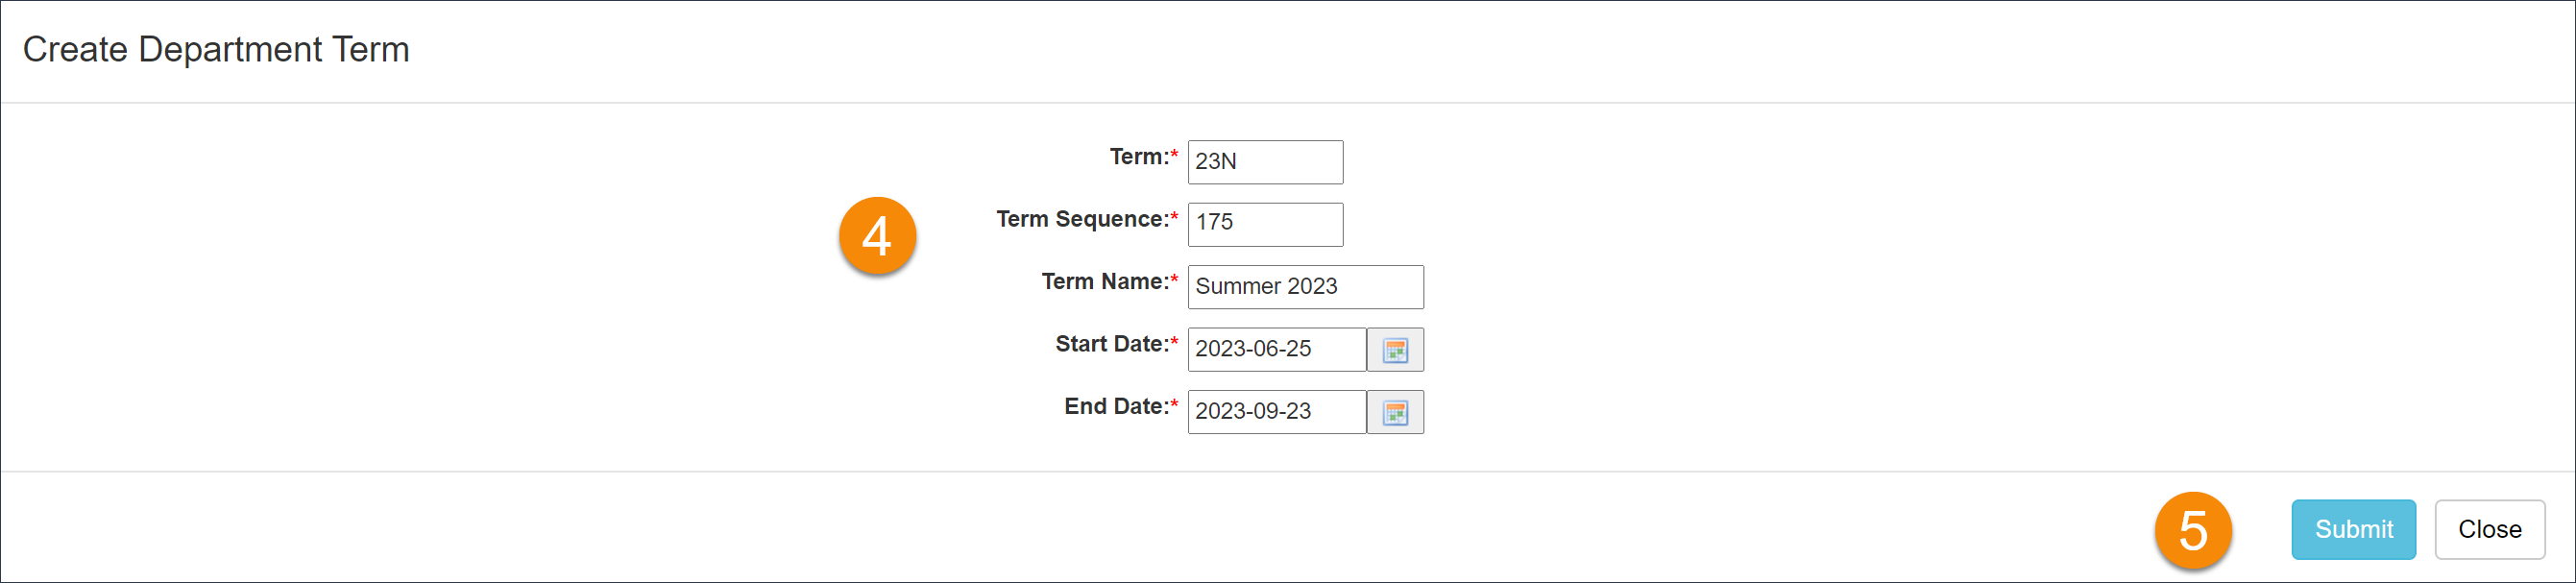 form for creating a new term